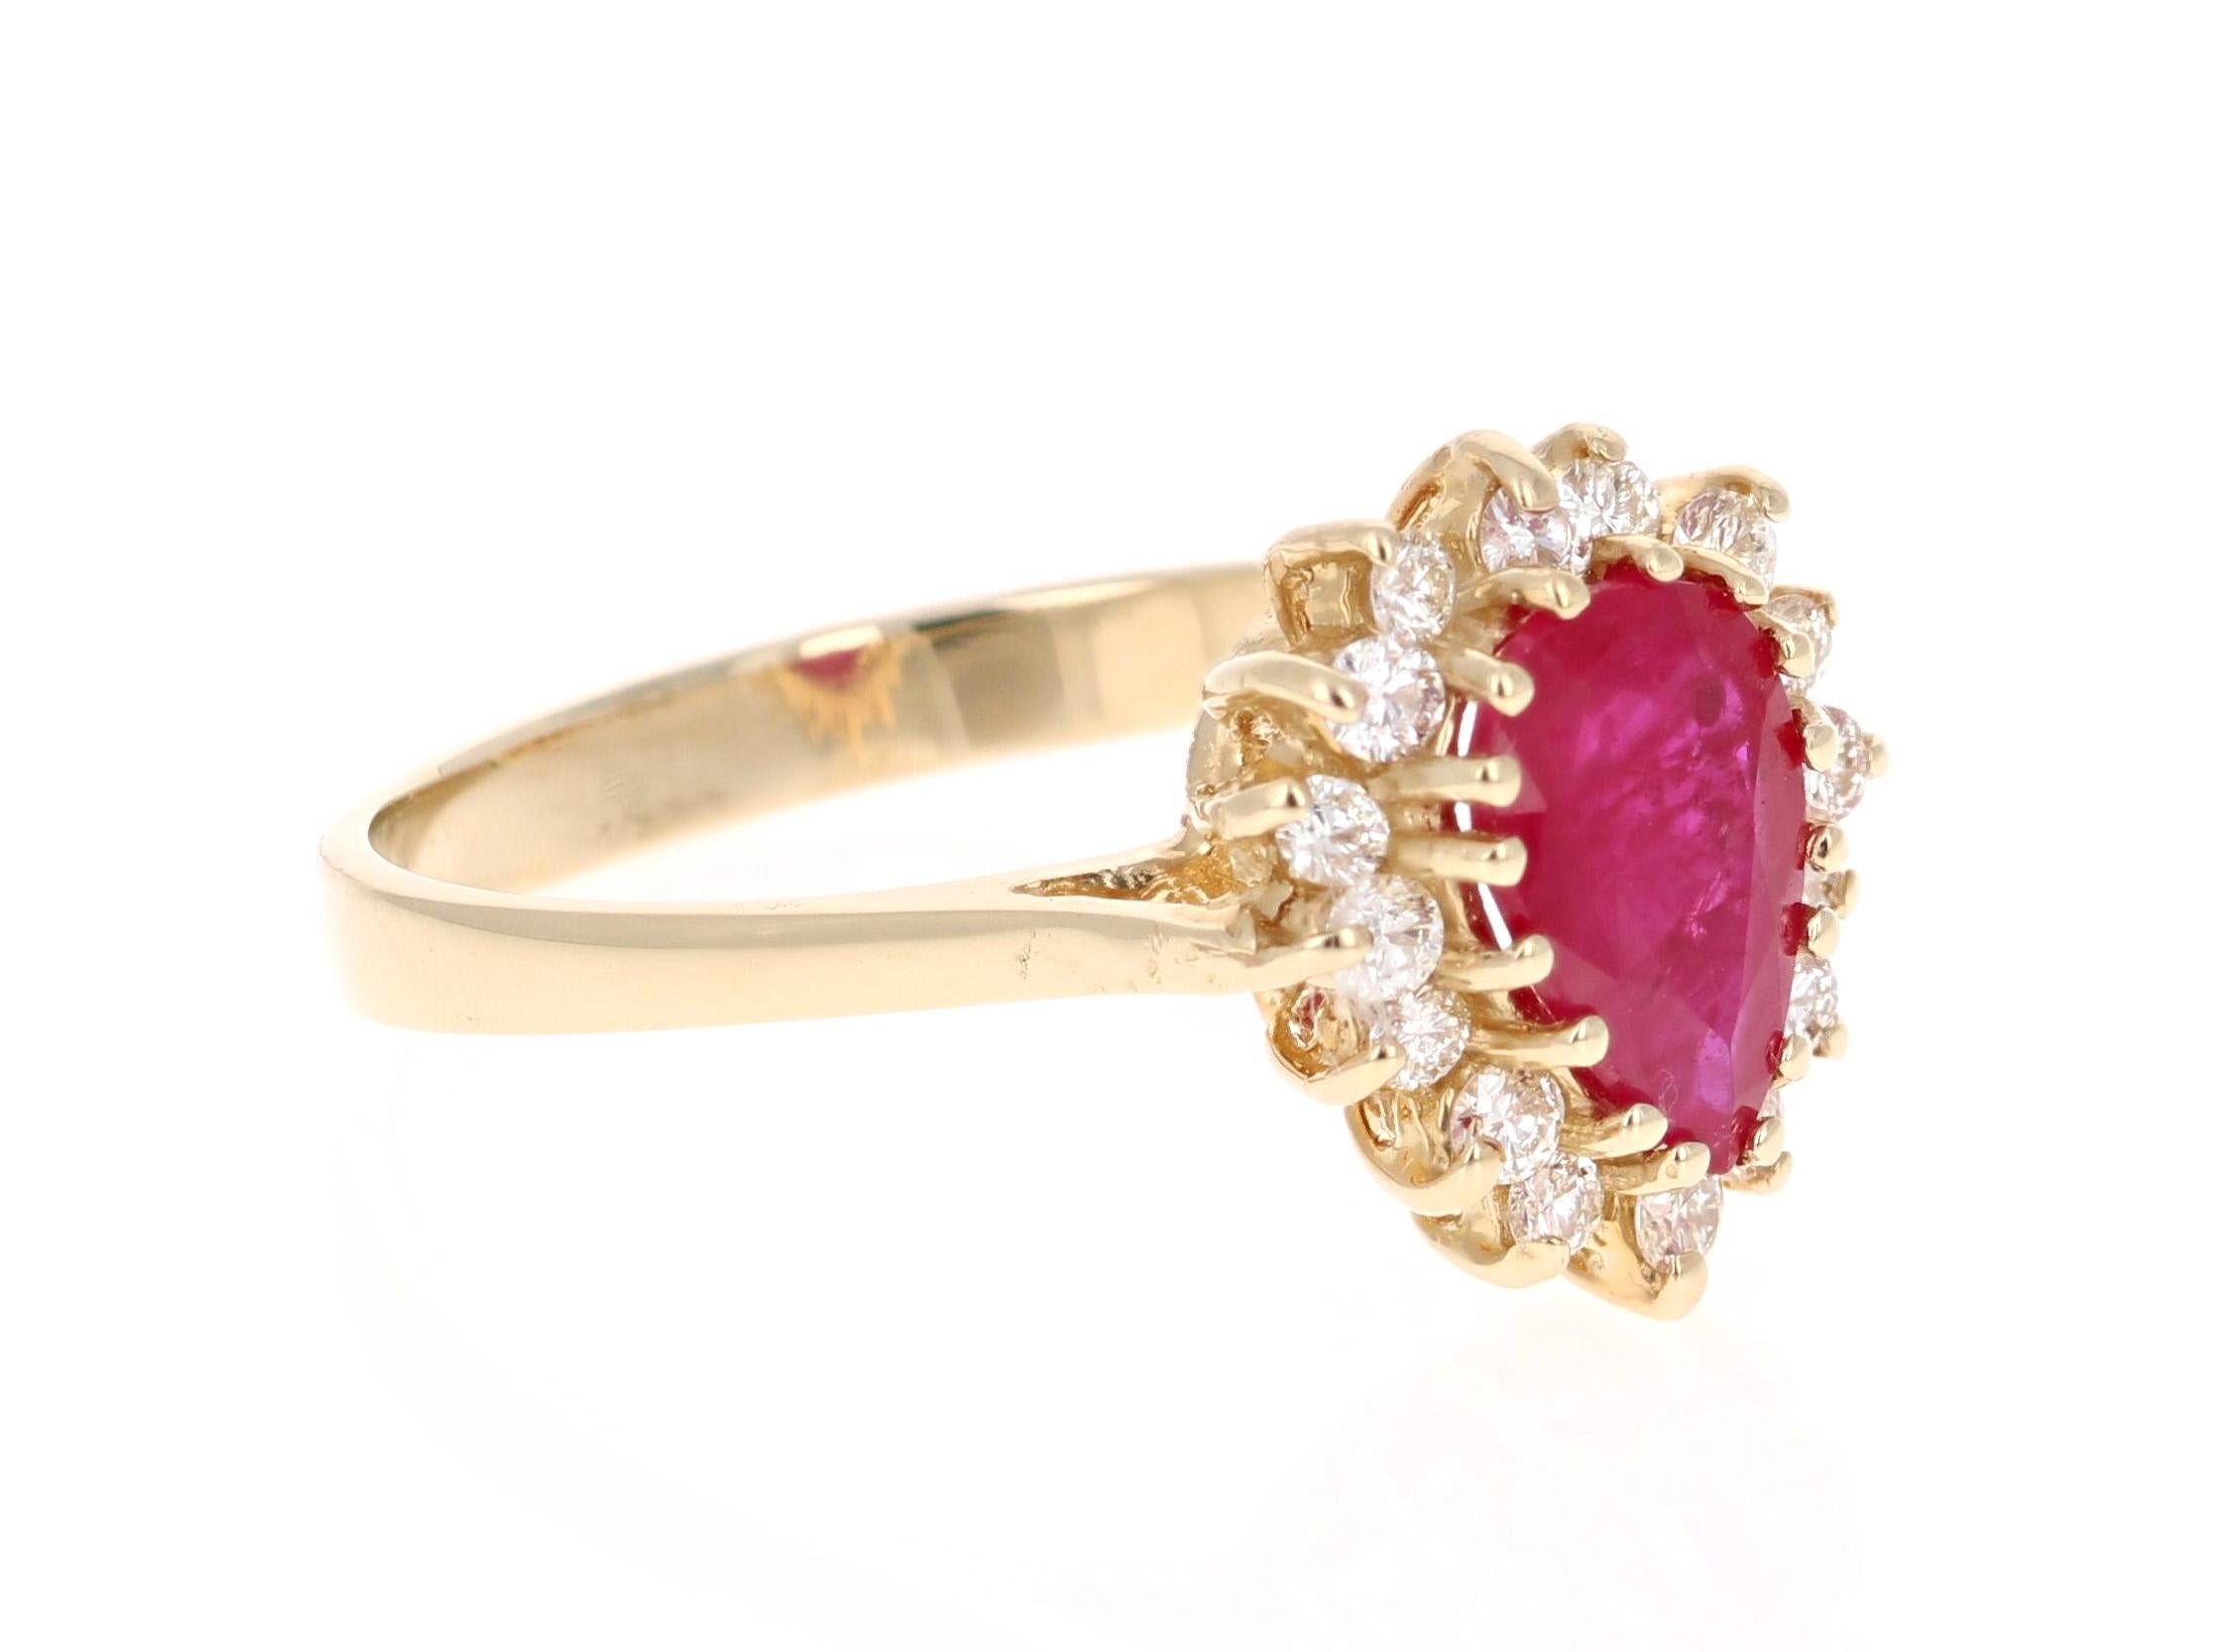 Simply beautiful Ruby Diamond Ring with a Pear Cut 1.19 Carat Ruby which is surrounded by 16 Round Cut Diamonds that weigh 0.26 carats. The total carat weight of the ring is 1.45 carats. The clarity and color of the diamonds are VS2-H. 

The ring is